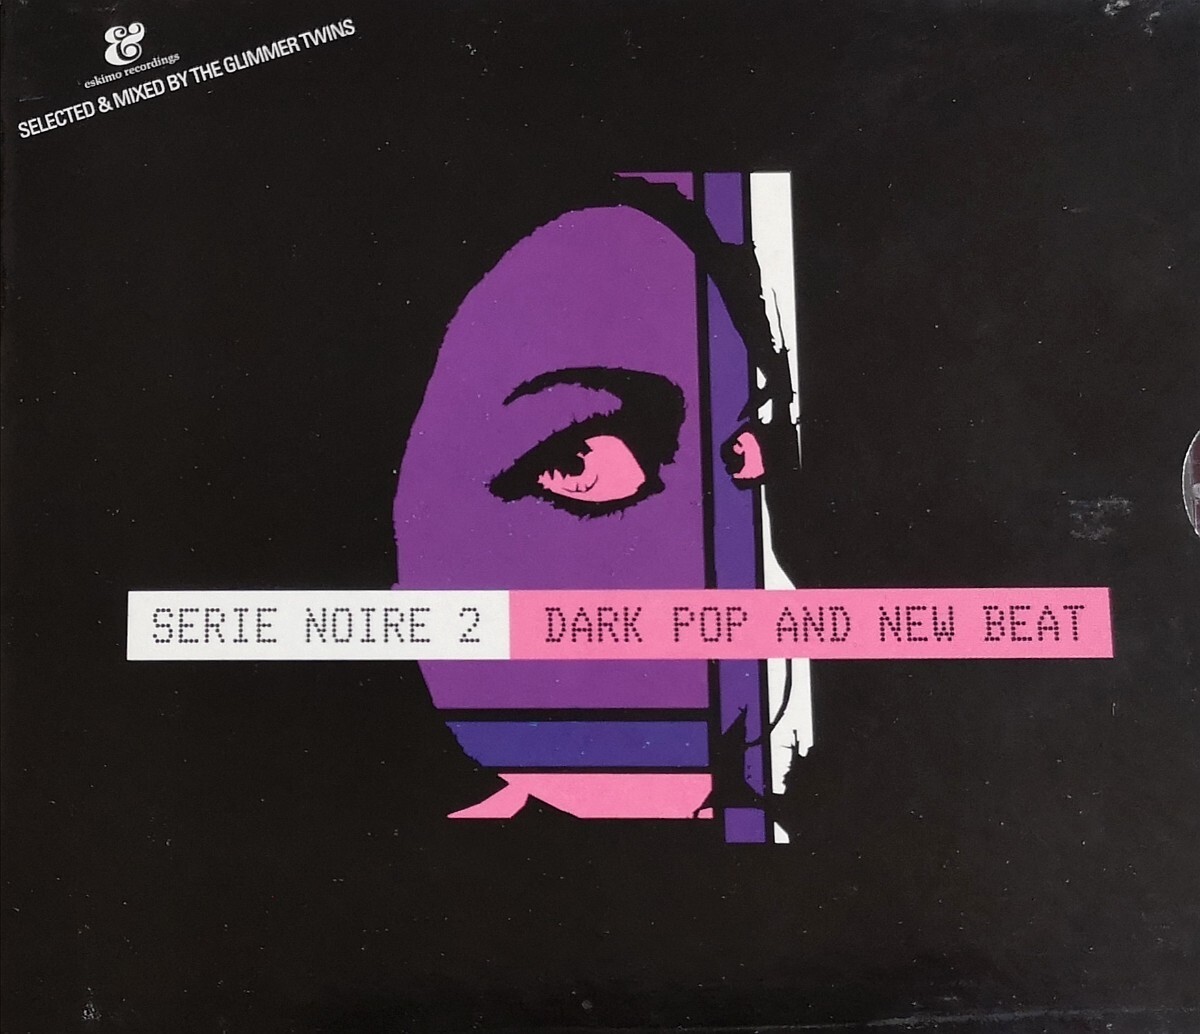 【THE GLIMMER TWINS/SERIE NOIRE 2: DARK POP AND NEW BEAT】 輸入盤CD_画像1